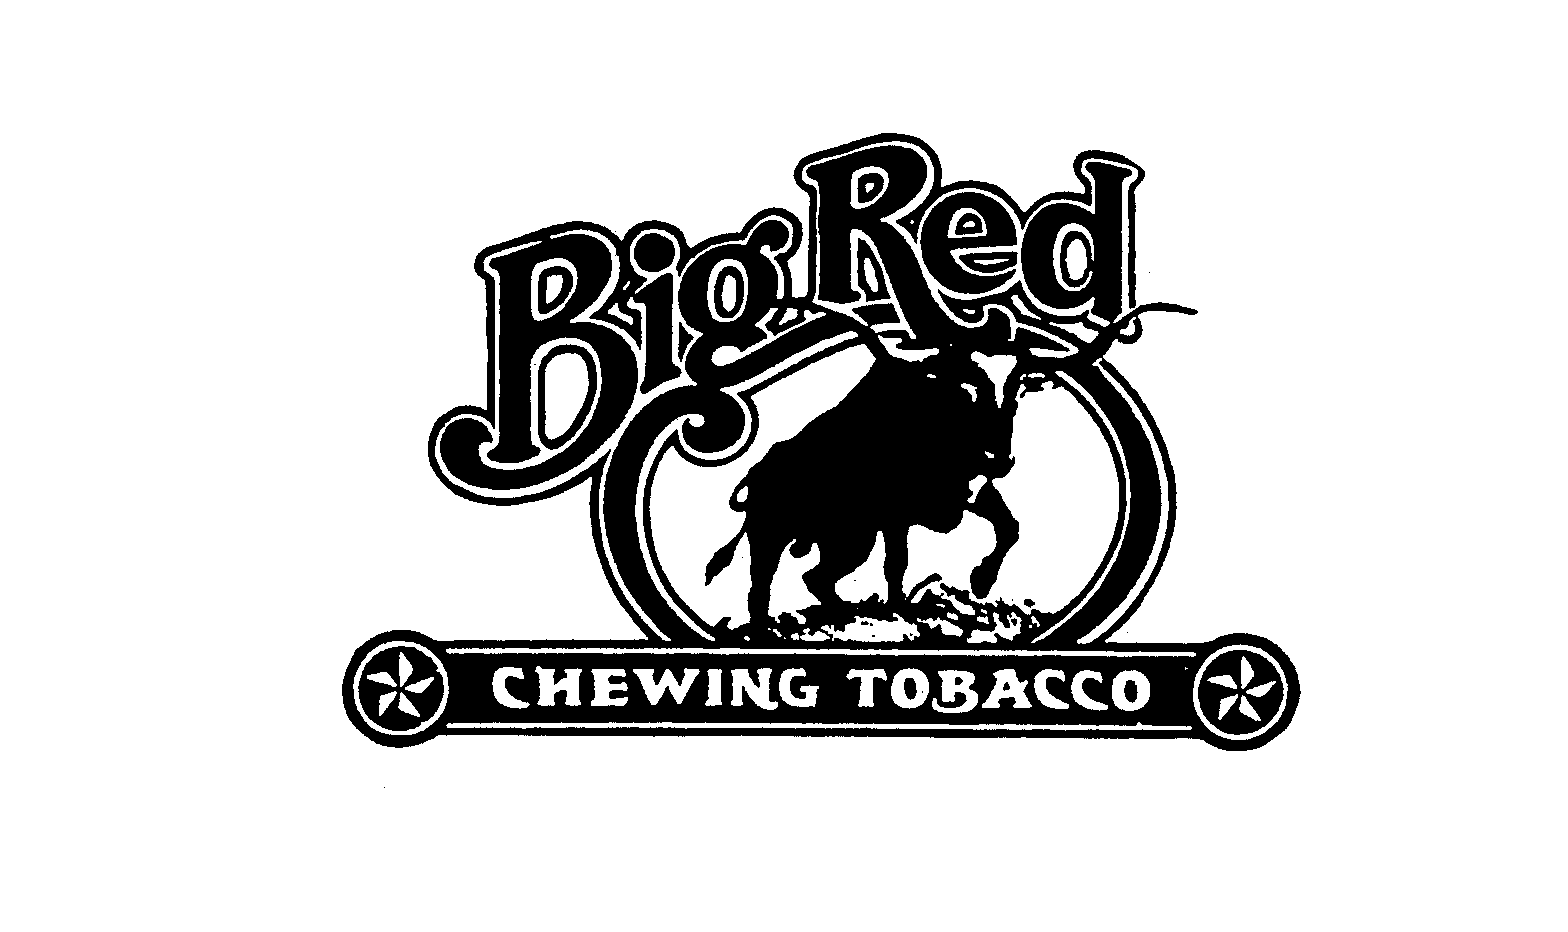  BIG RED CHEWING TOBACCO